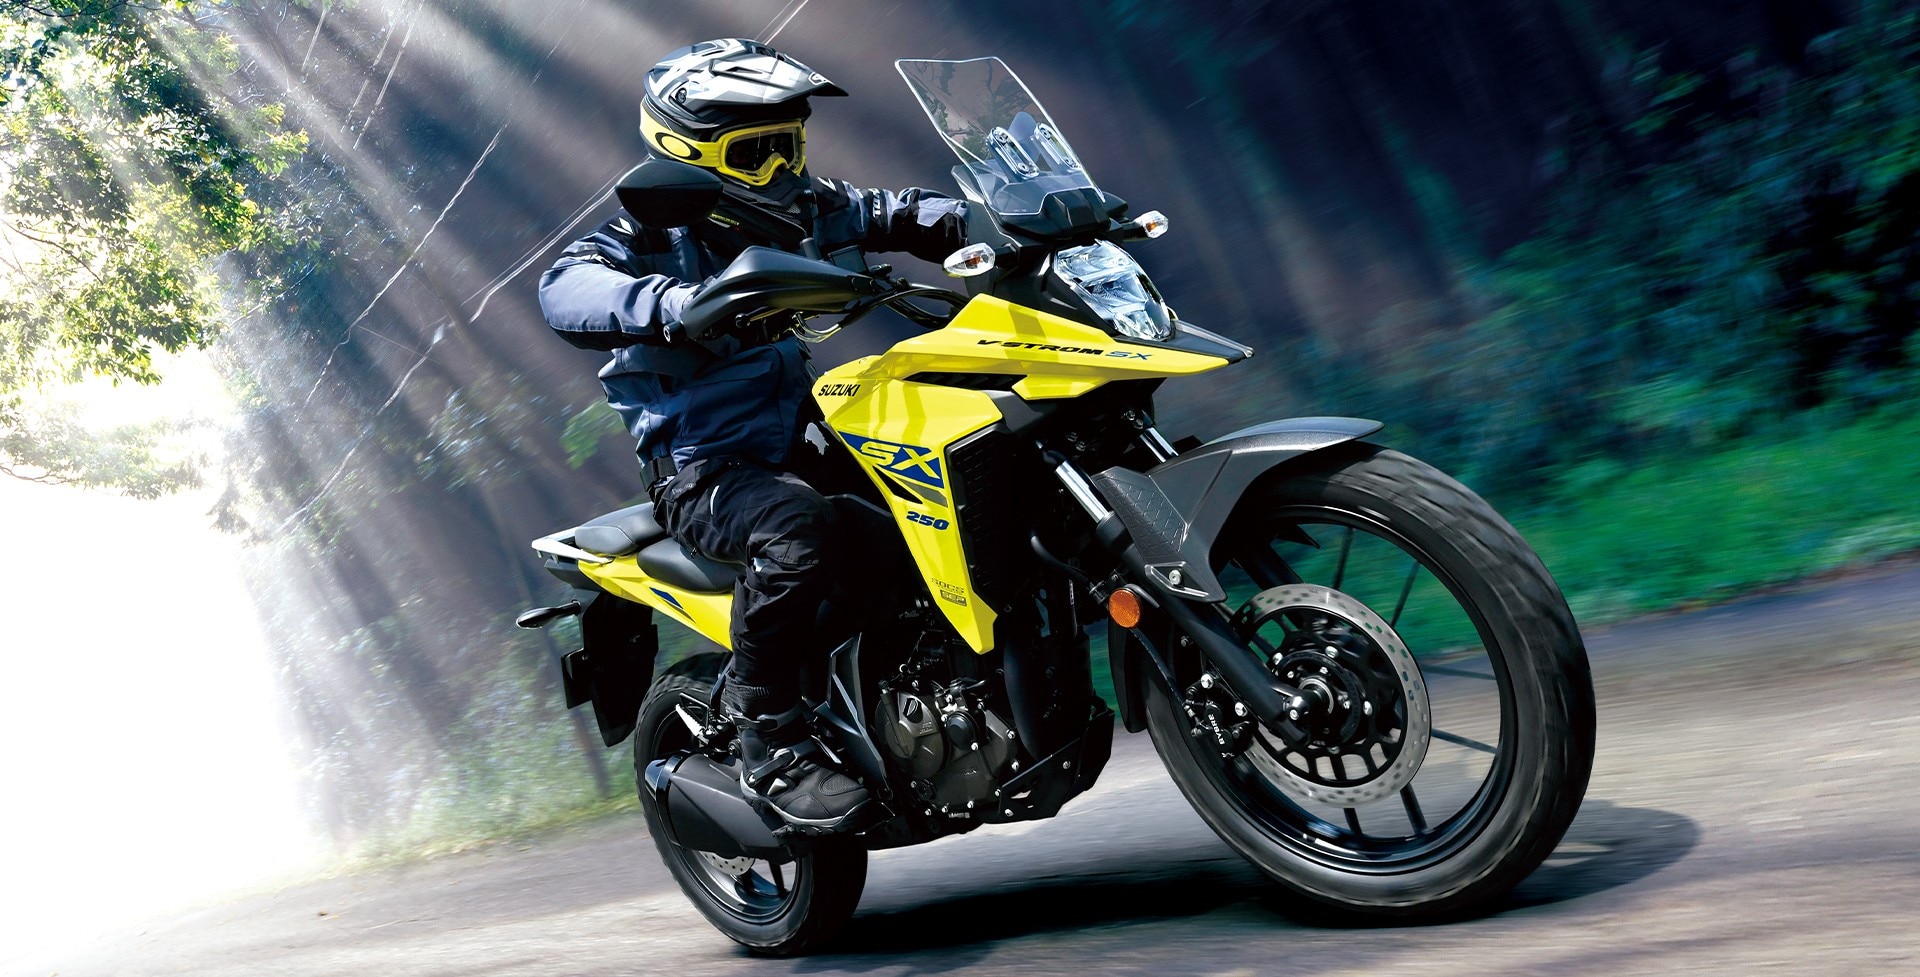 The Japanese-spec Suzuki V-Strom SX 250 is identical to the Indian version and draws power from the same 249 cc oil-cooled, single-cylinder motor